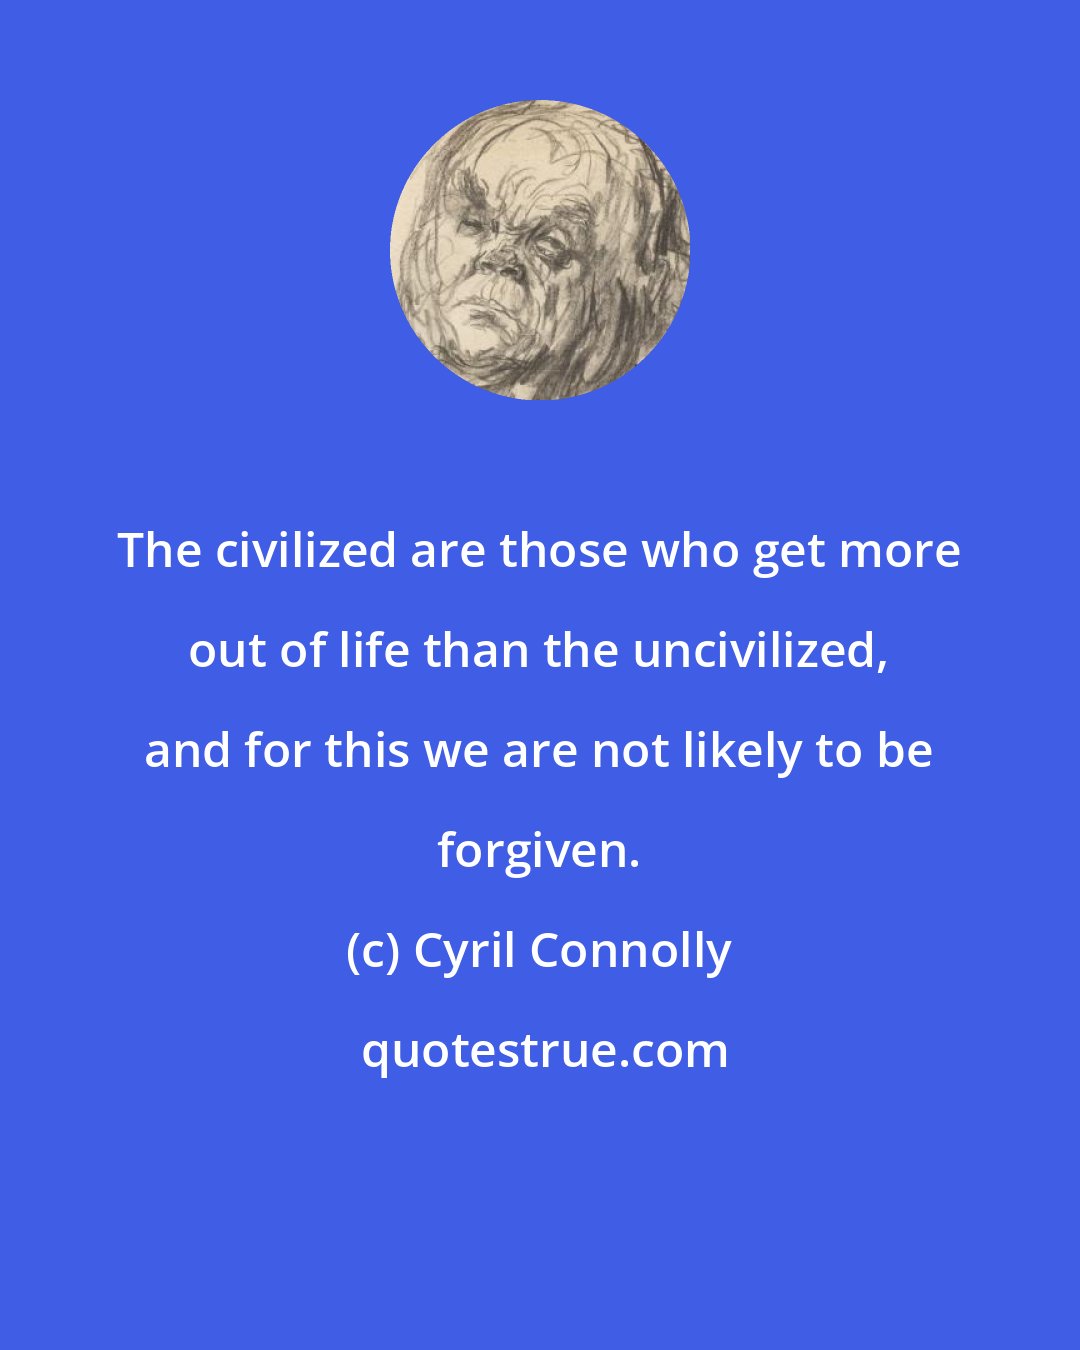 Cyril Connolly: The civilized are those who get more out of life than the uncivilized, and for this we are not likely to be forgiven.